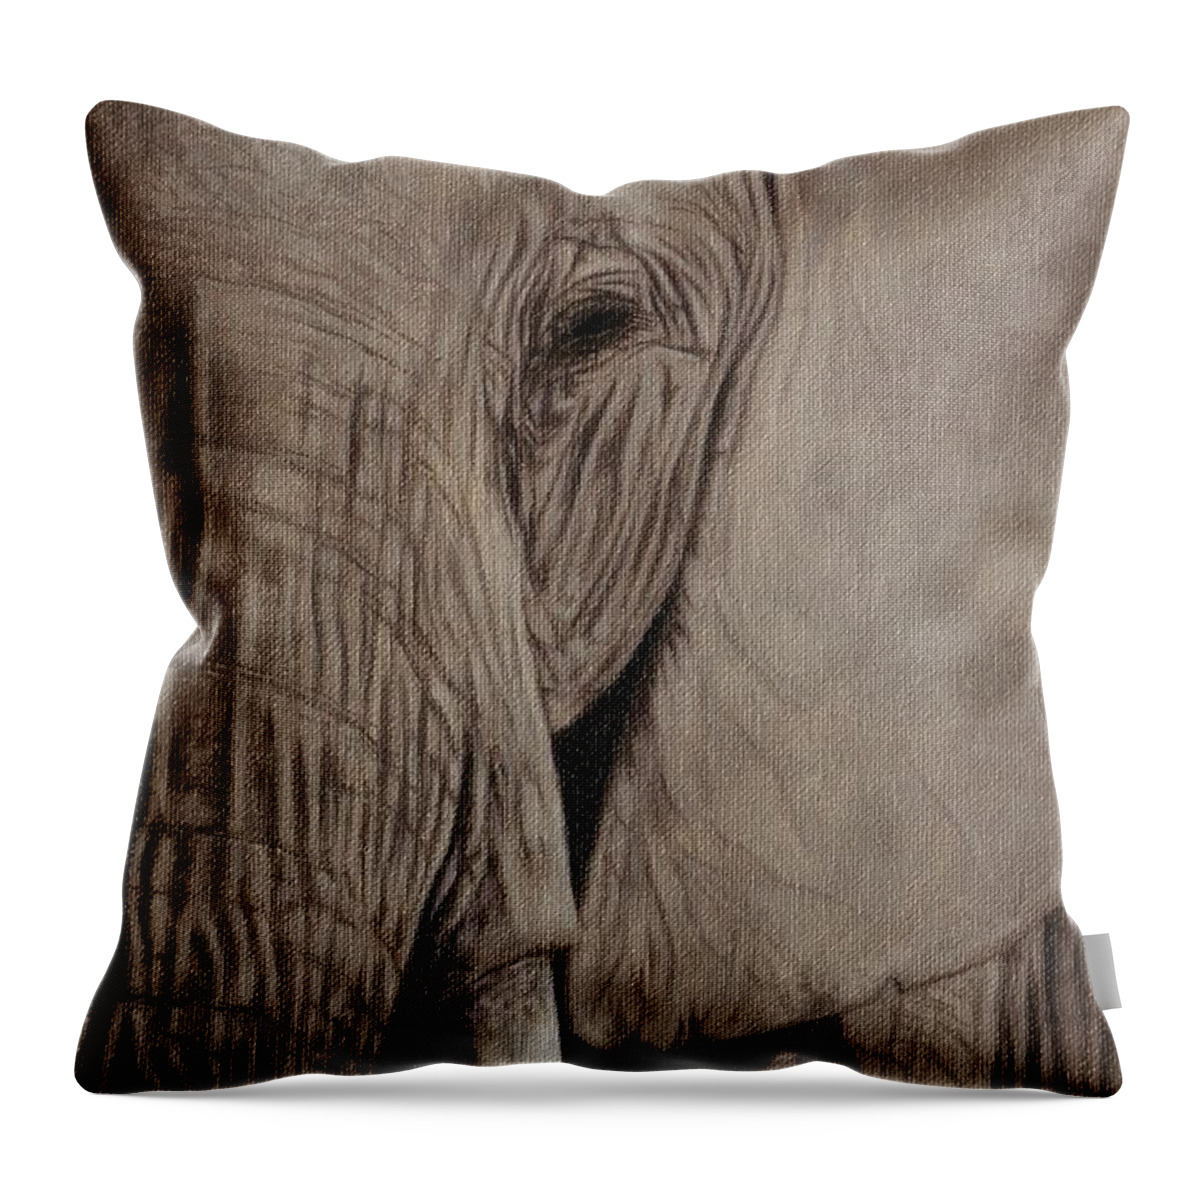 African Elephant Throw Pillow featuring the painting African Elephant Painting by Rachel Stribbling